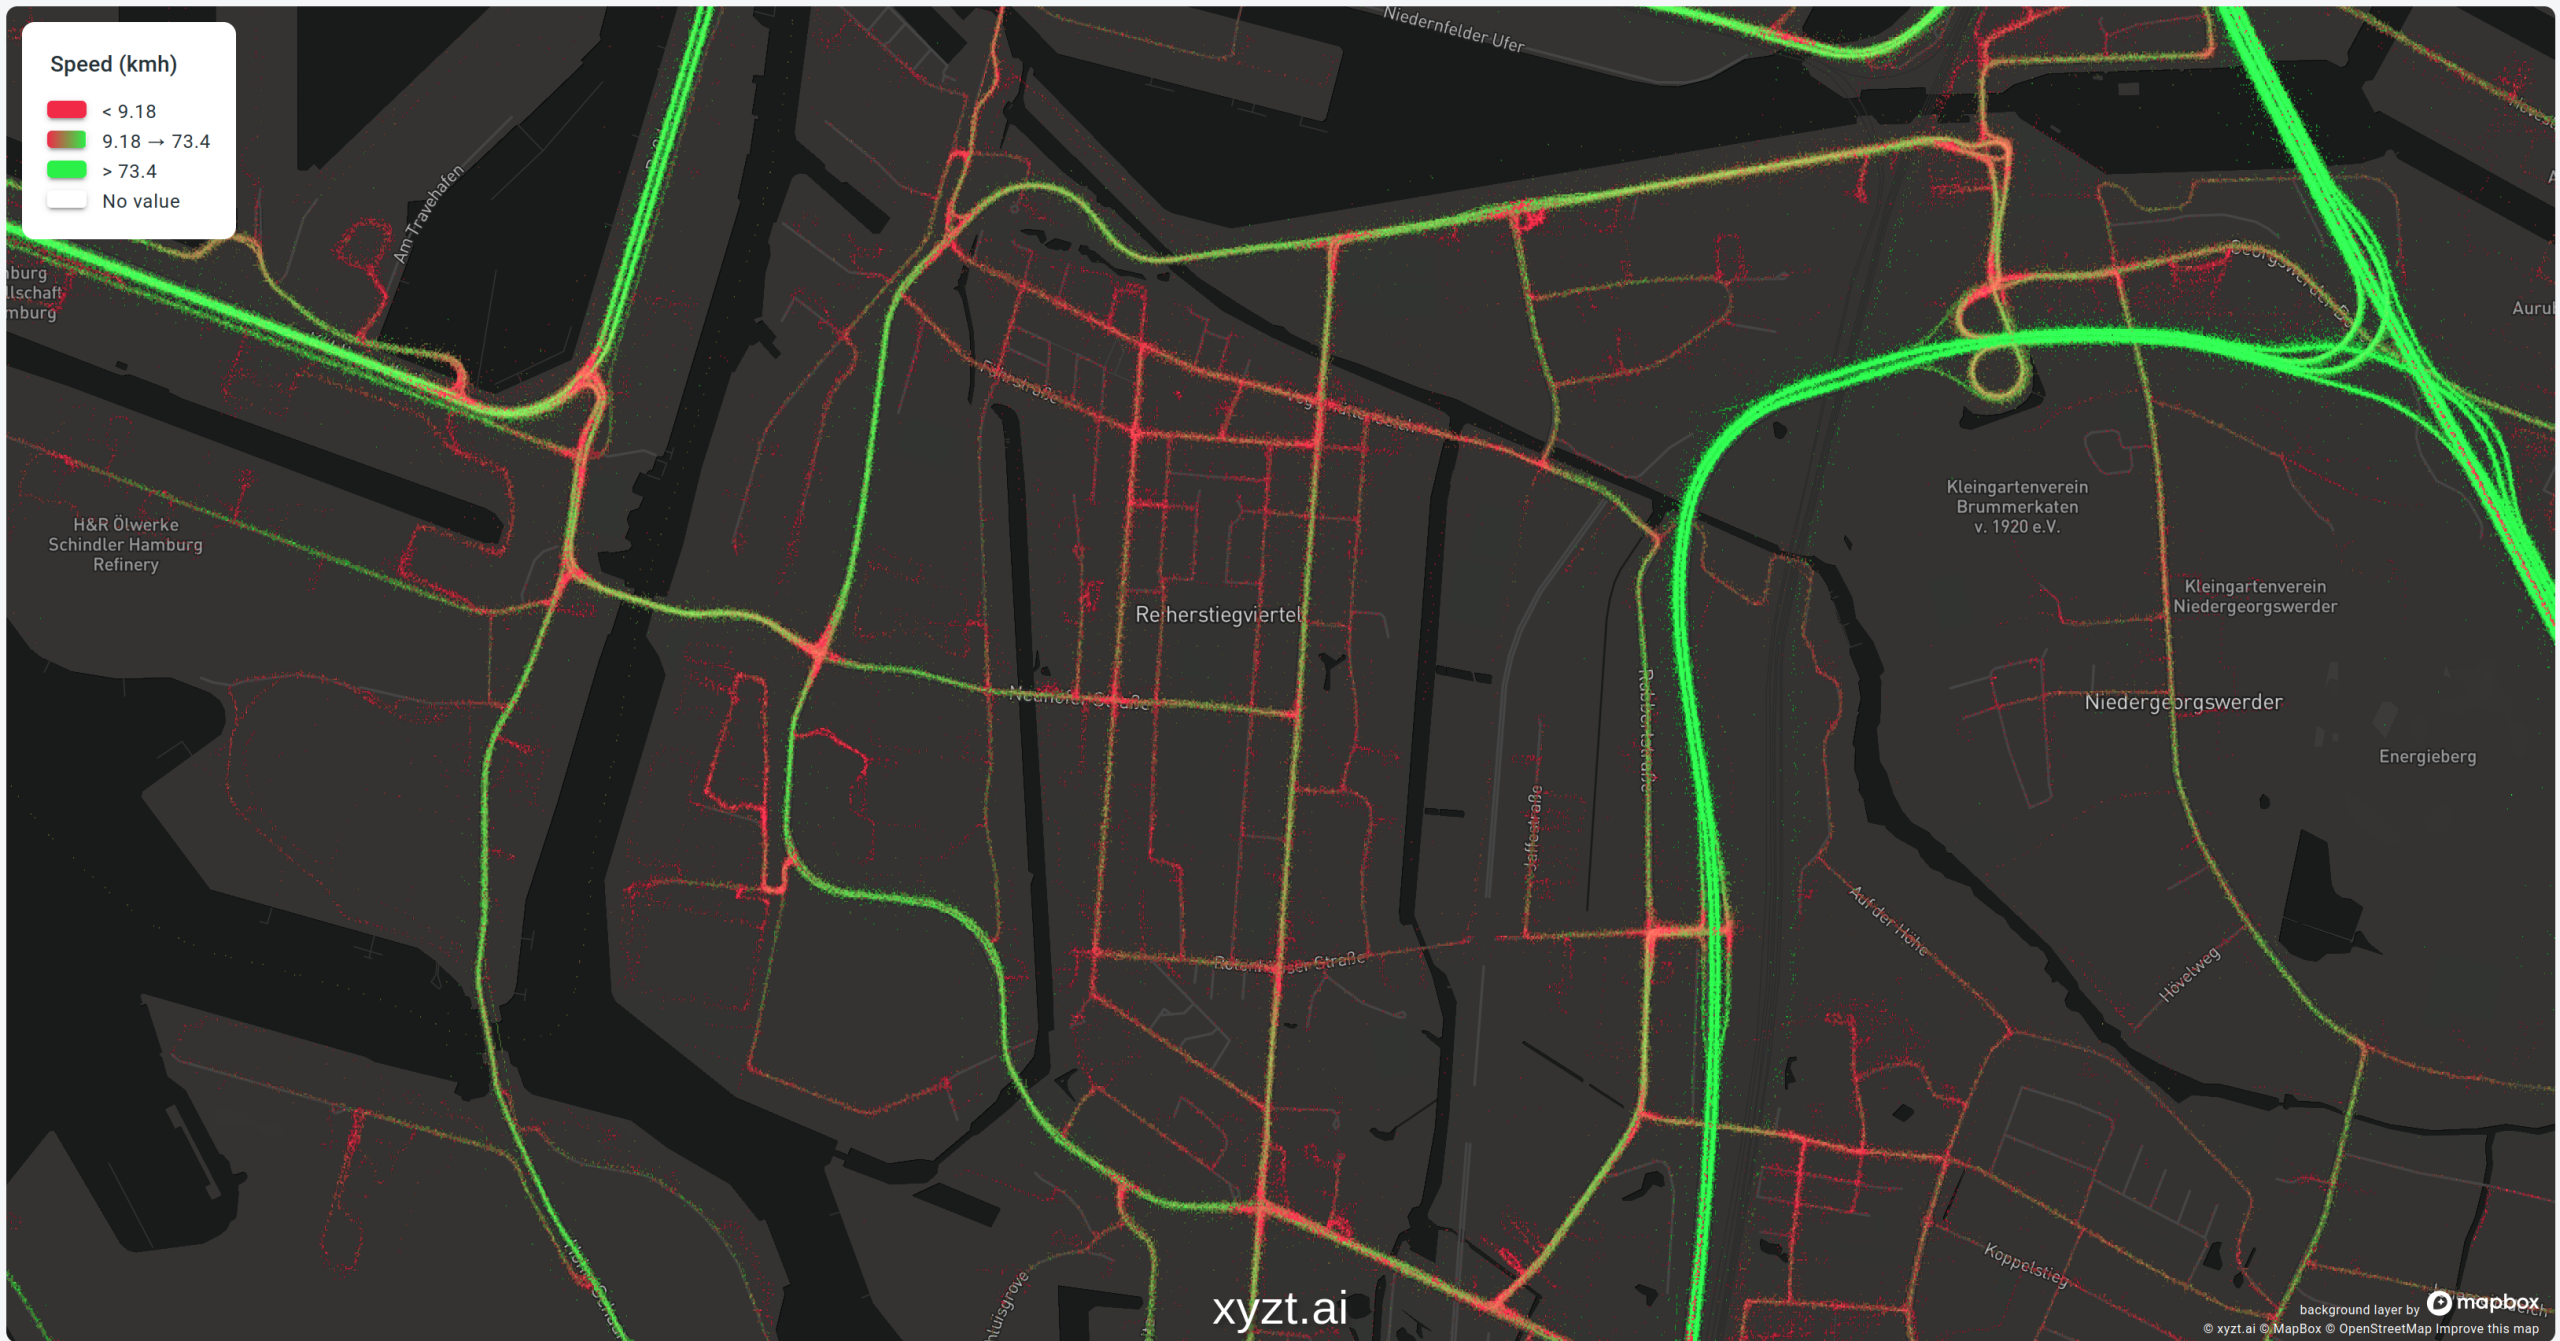 Connected car data in Berlin, Germany. Red indicates low speeds, green high speeds. Data provided by Inrix and visualized by xyzt.ai.